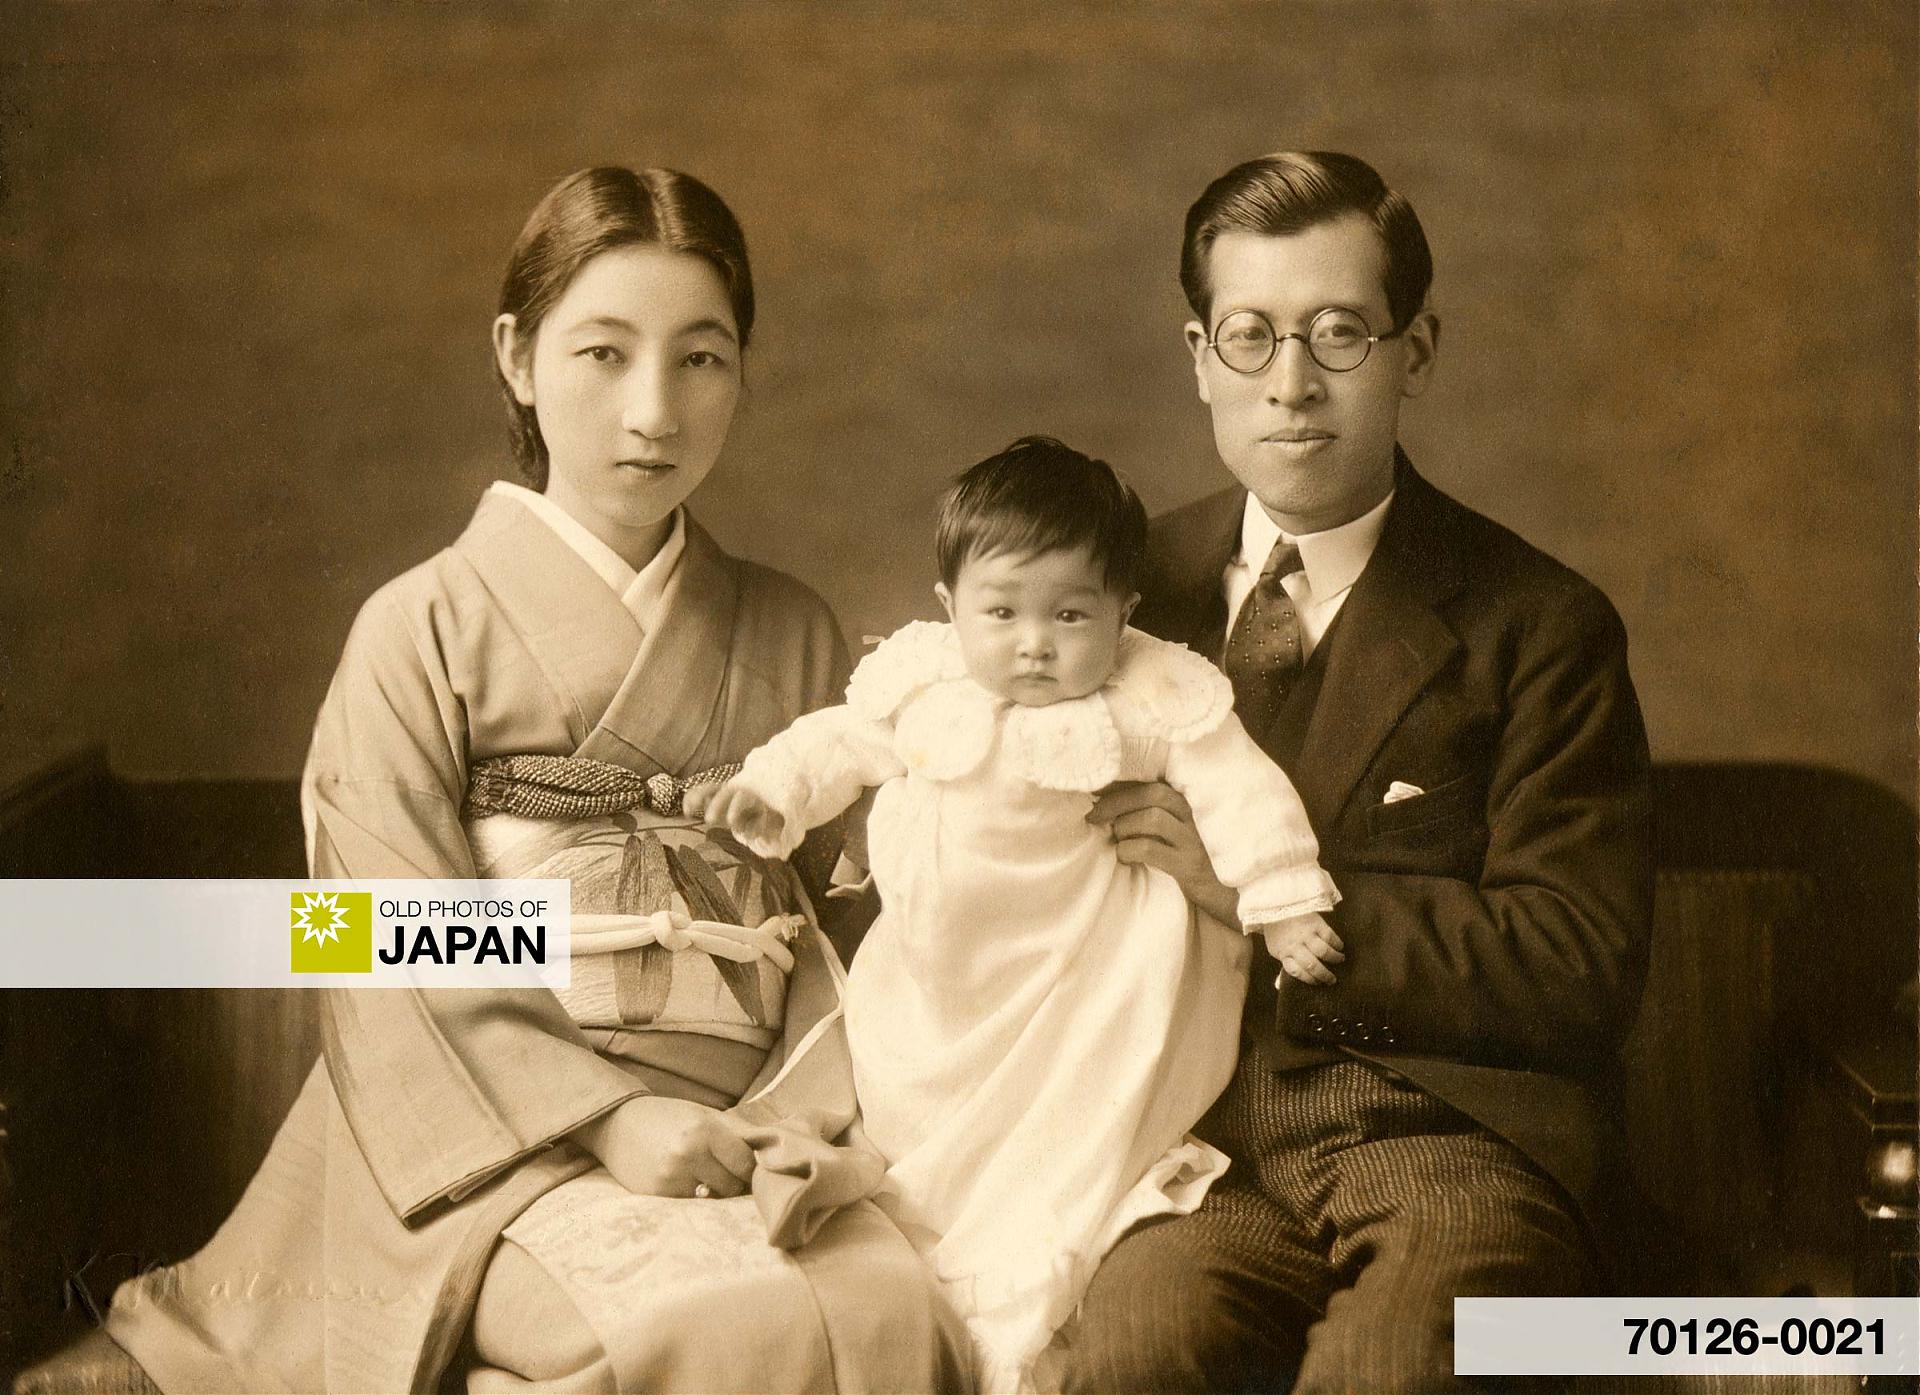 70126-0021 - Japanese Husband, Wife and Baby, 1910s